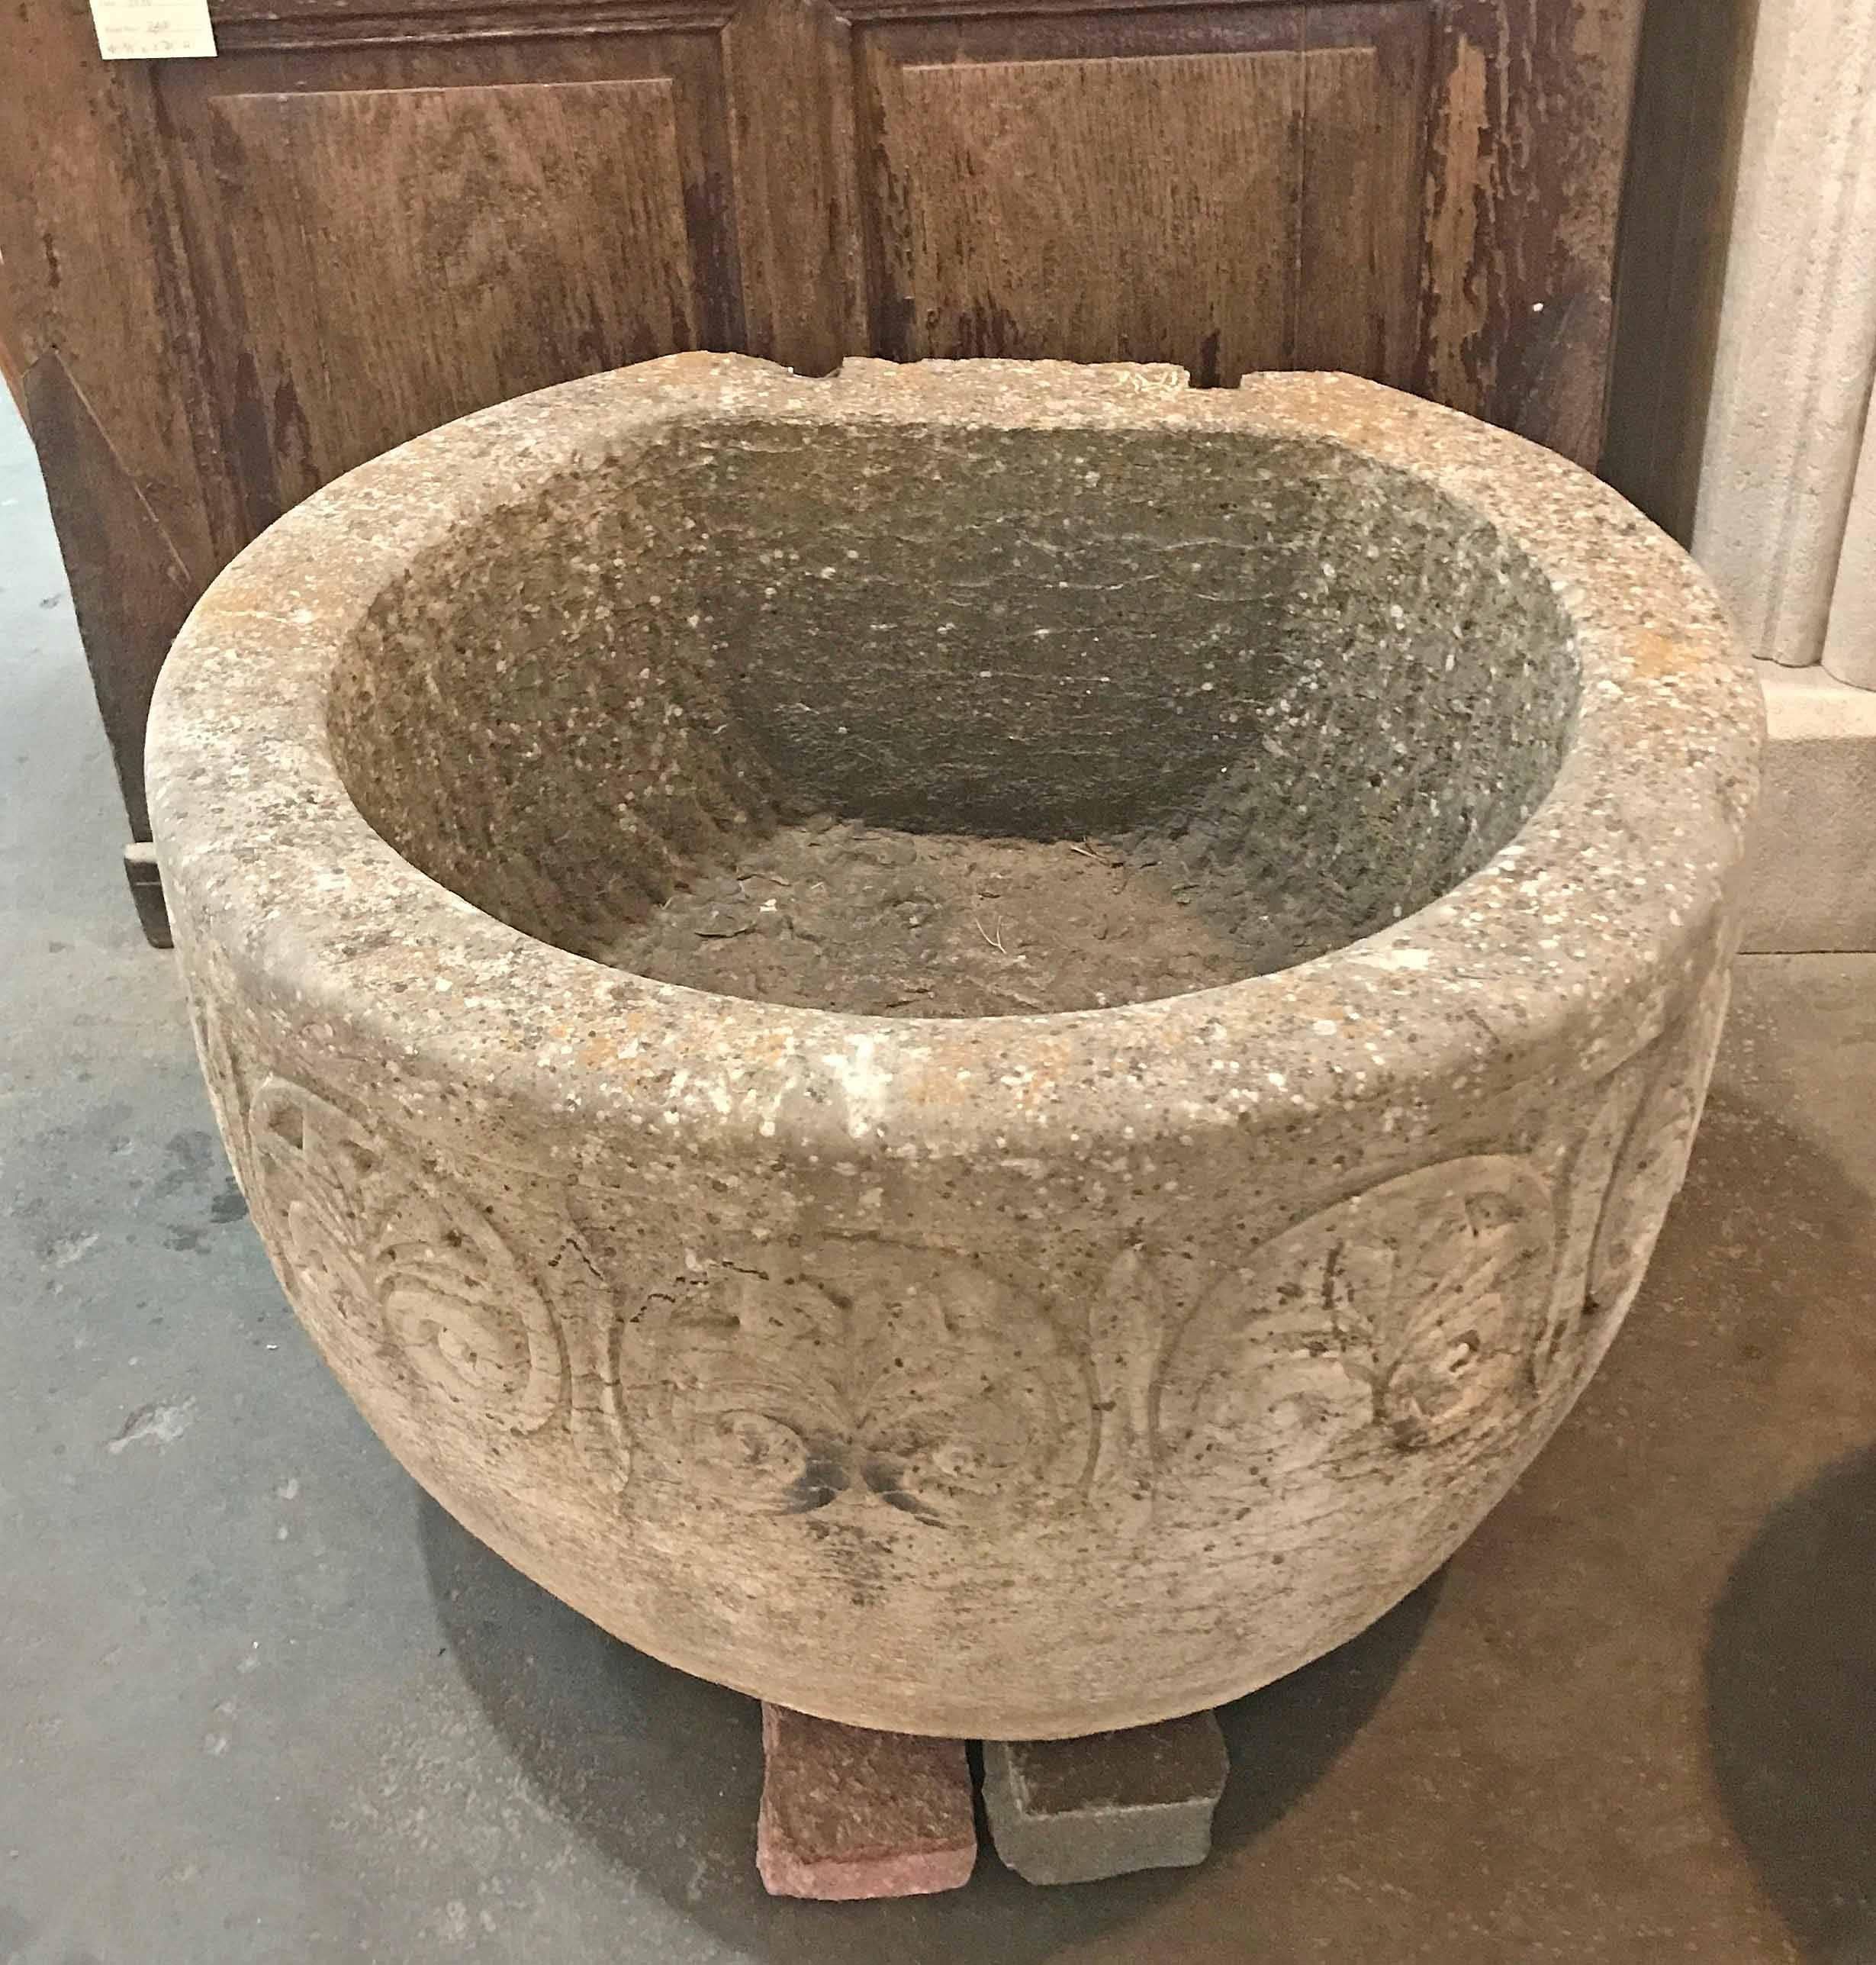 A palmier for your palm tree
A large limestone planter with Classic palmette motifs repeating in a large band around the front and sides.
The back is flattened so it can sit securely against a wall.

Origin: France,

circa